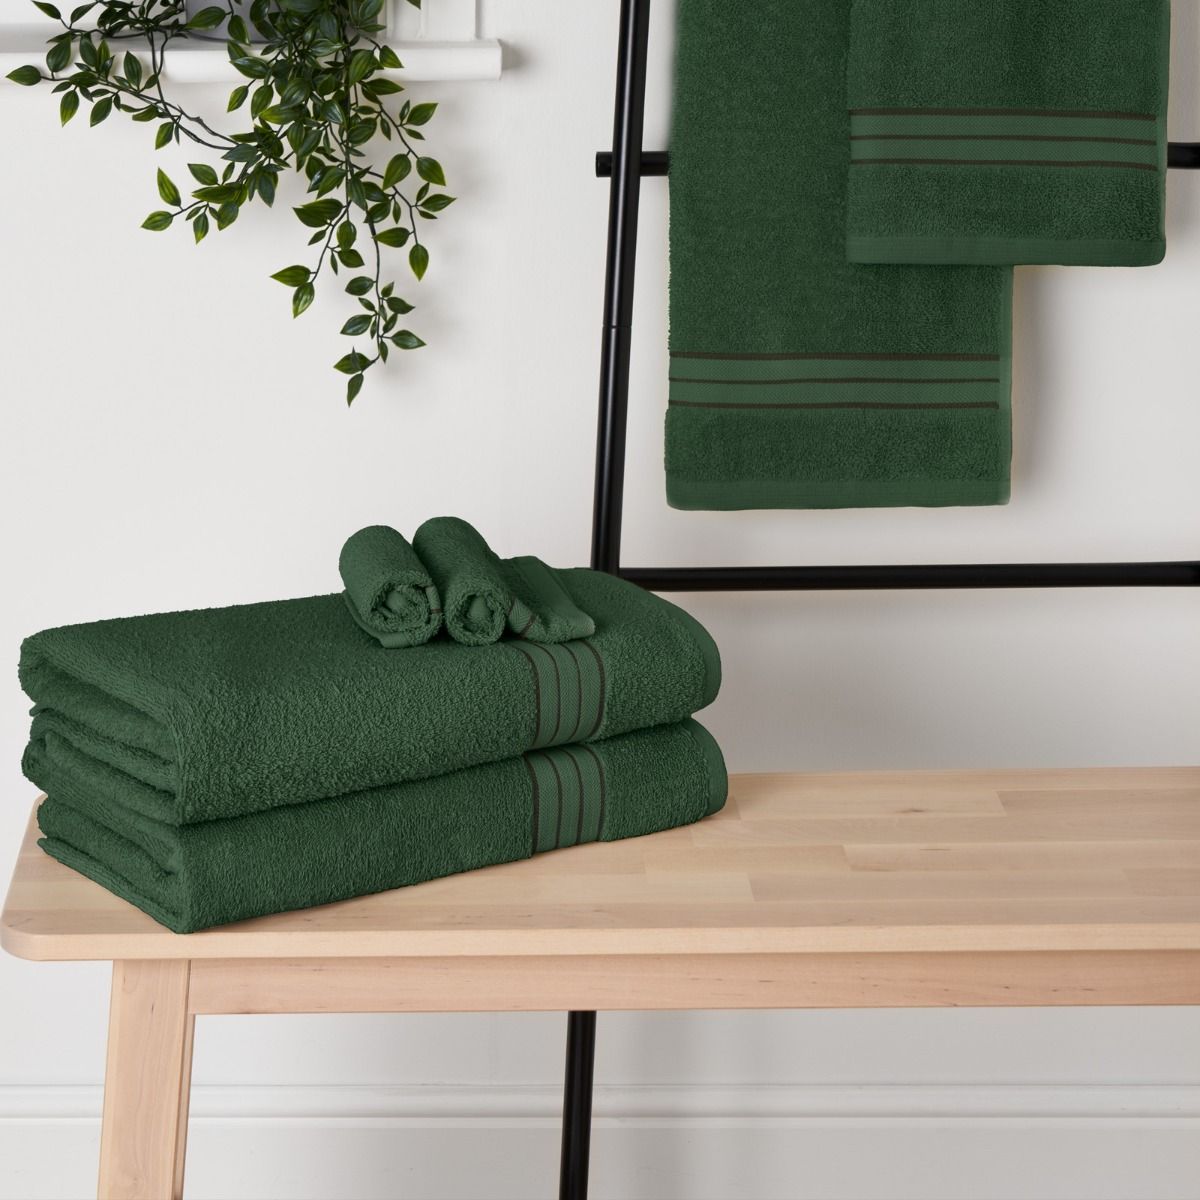 Brentfords 100% Cotton Face Cloth, Forest Green - 1PC